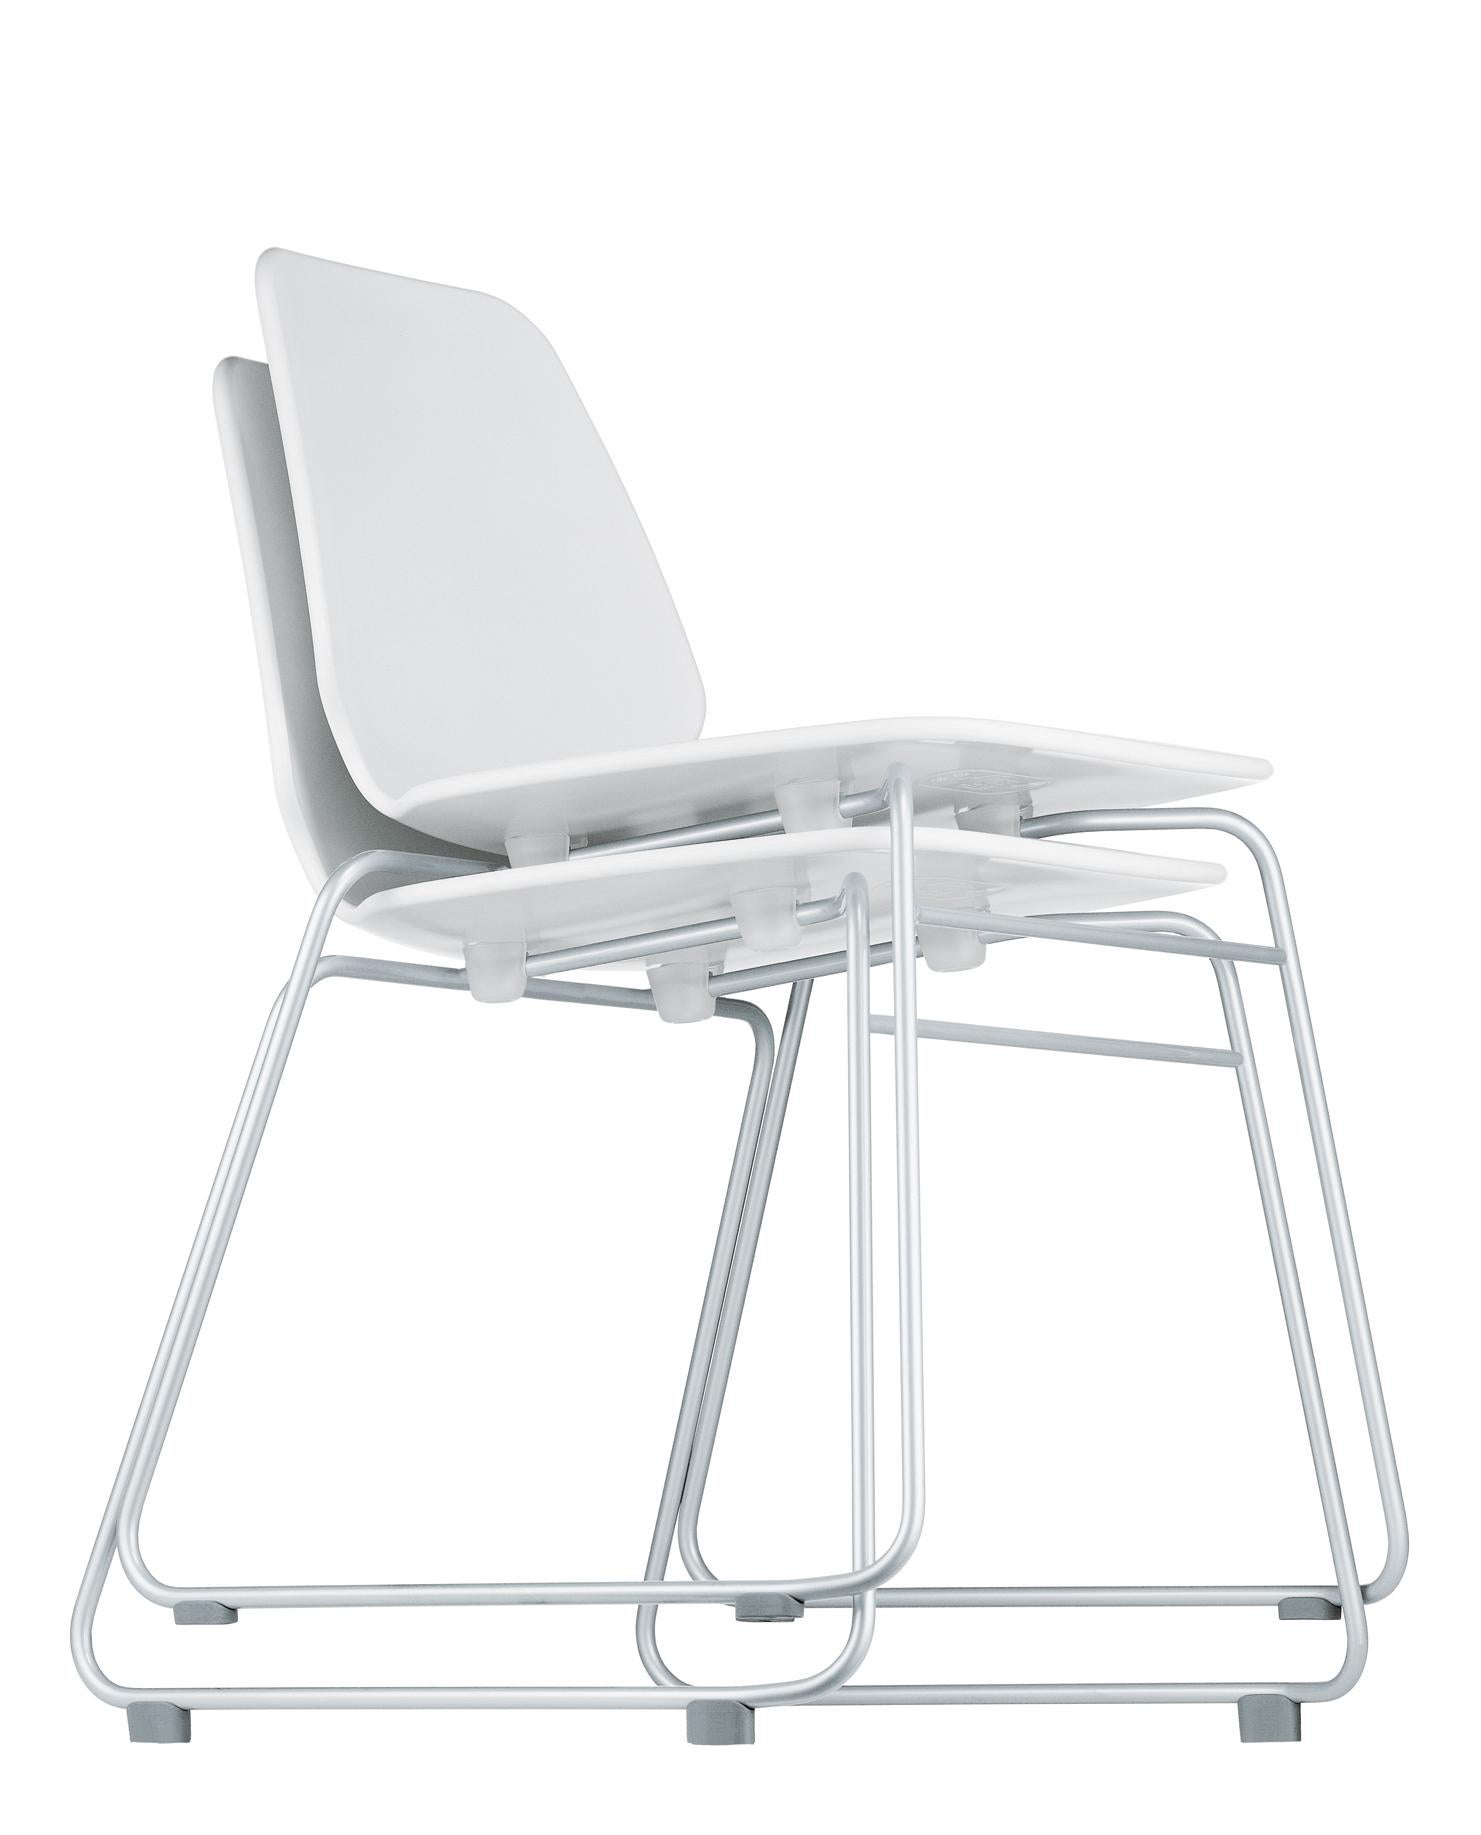 Italian Alias 531 Selinunte Sledge Chair in White Seat and Lacquered Steel Frame For Sale